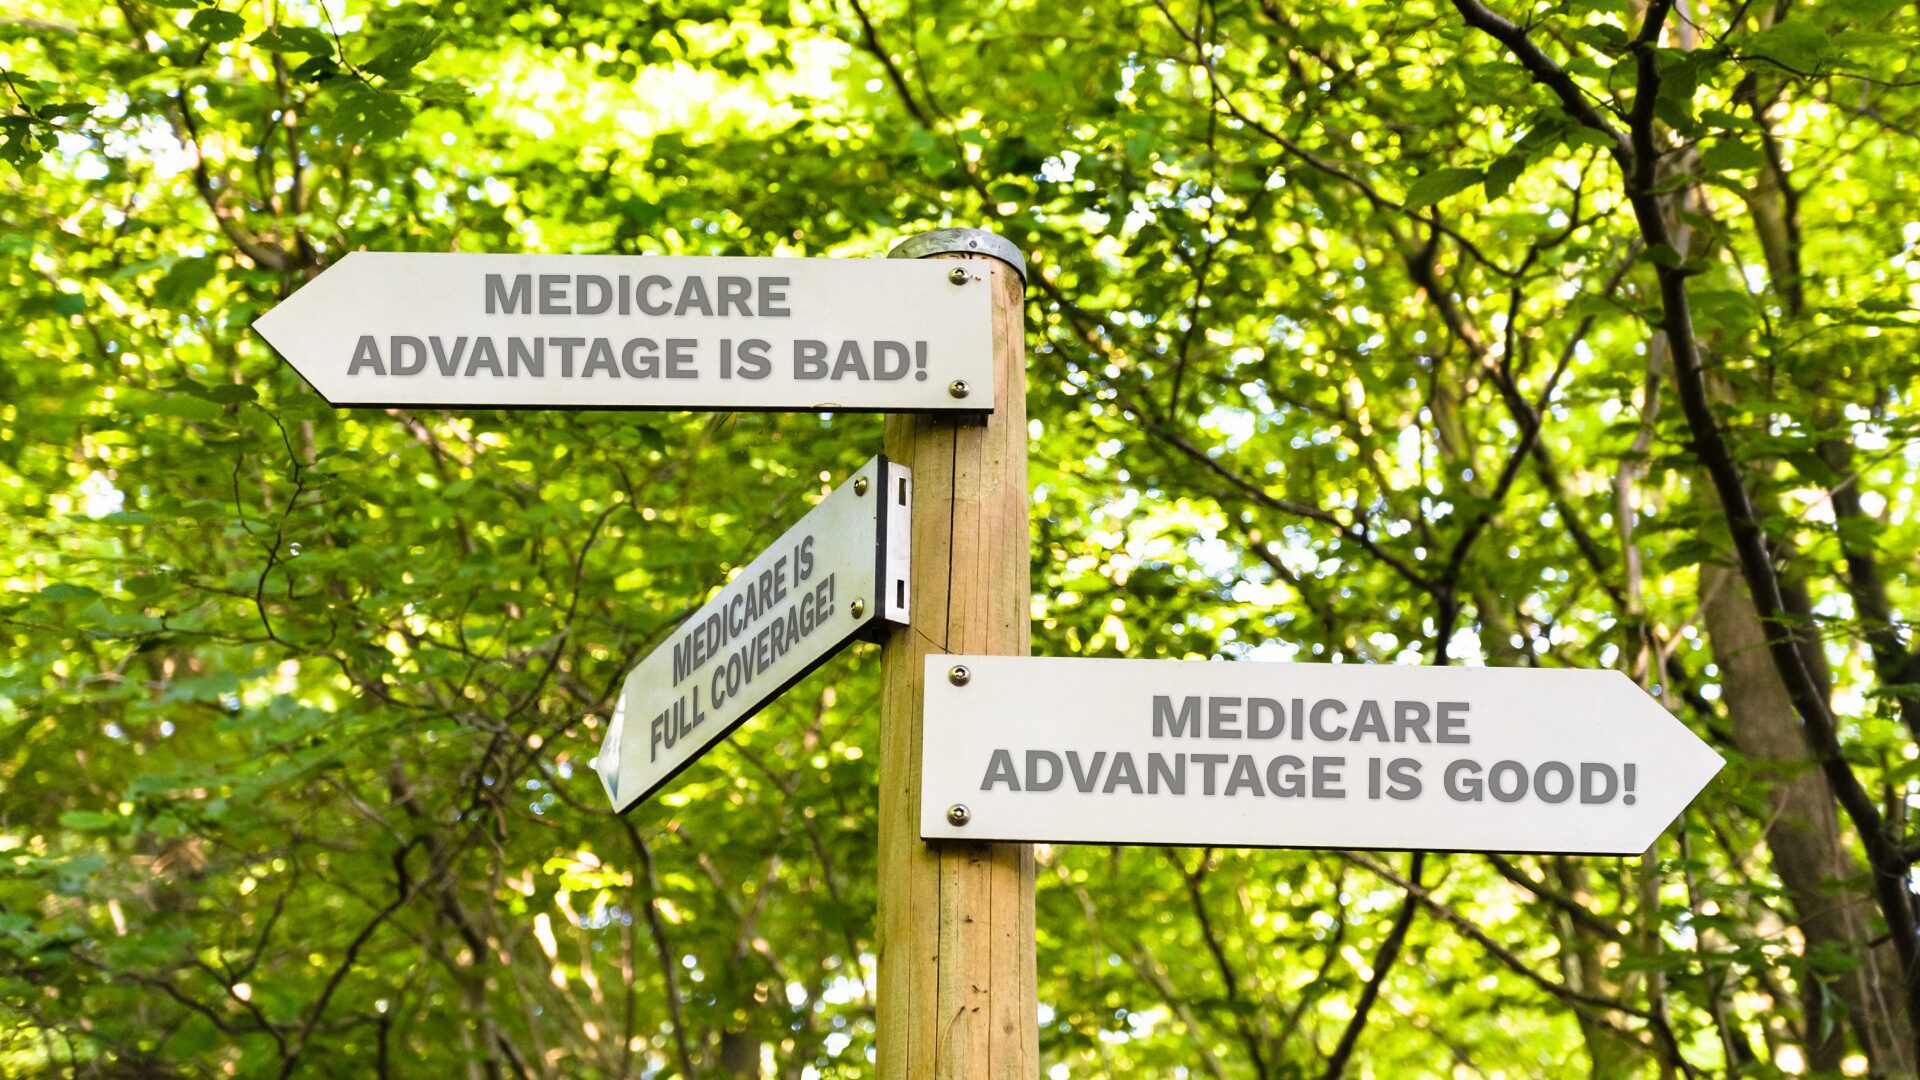 5 Groups Giving Bad Medicare Advice